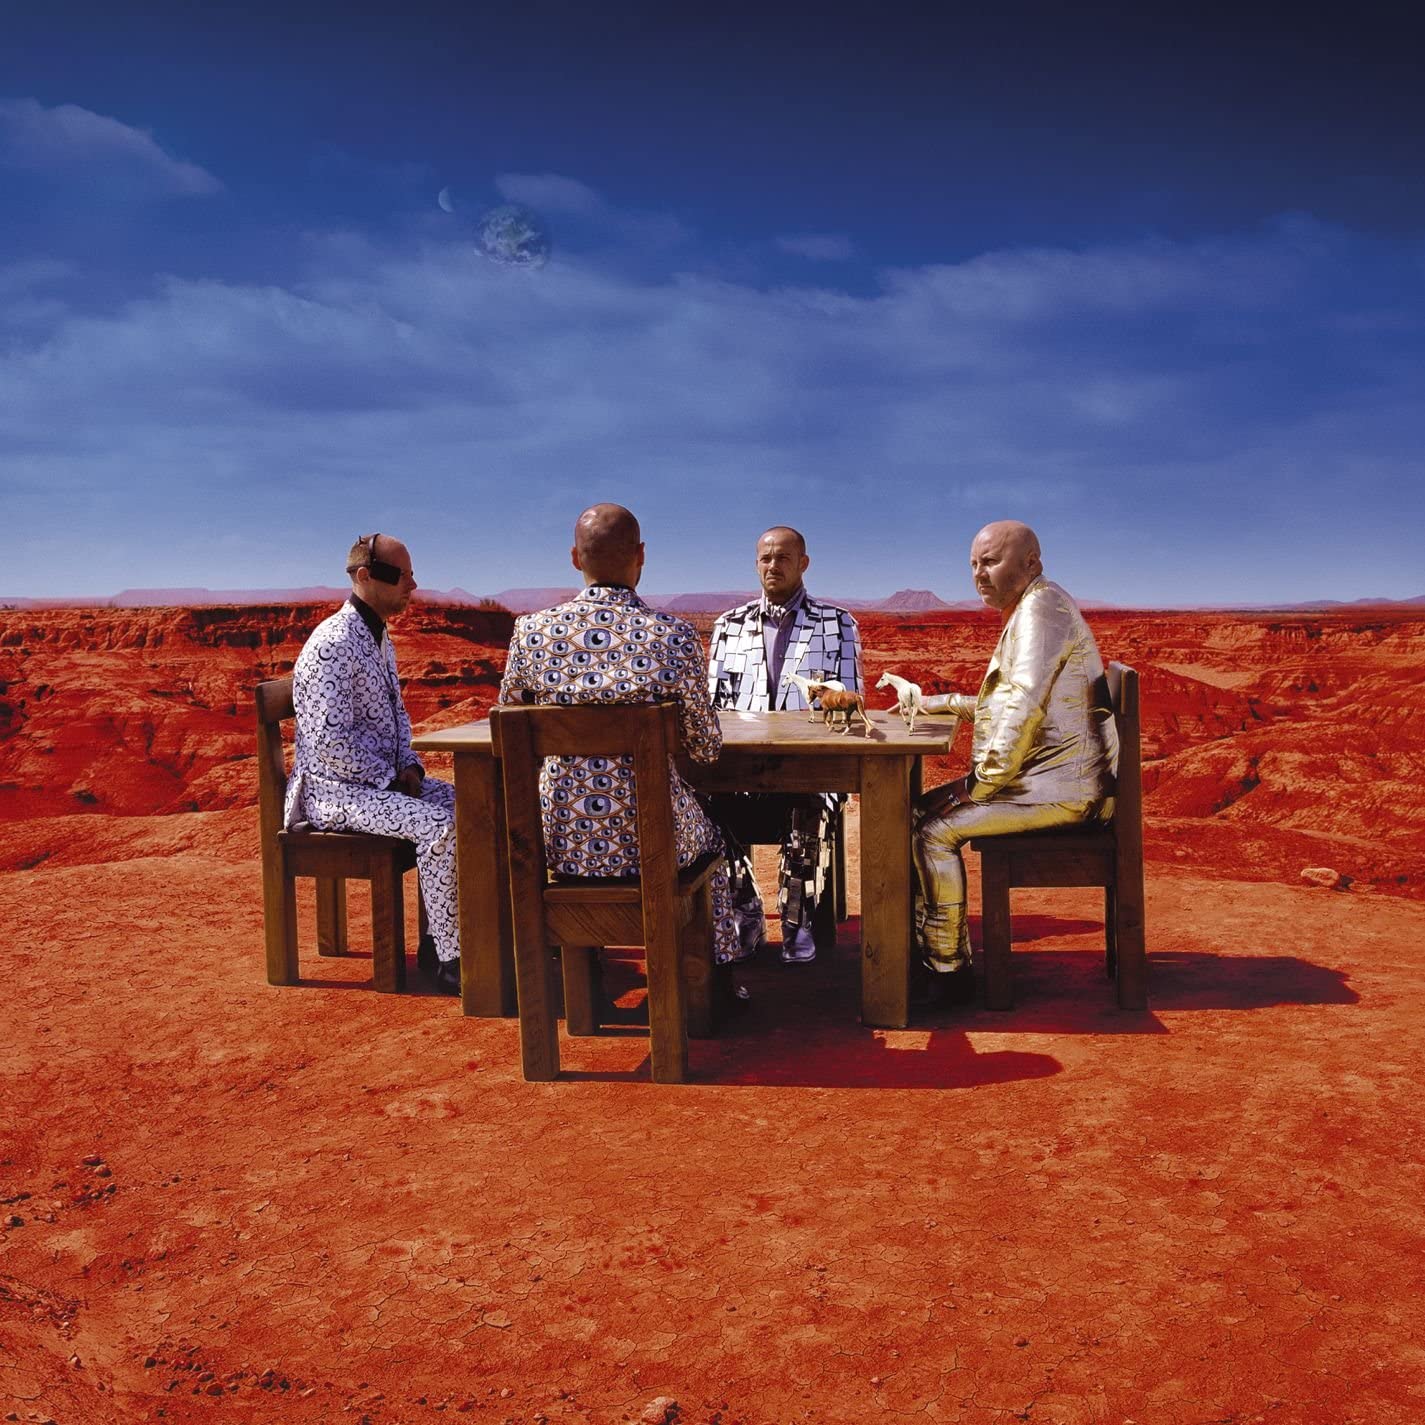 4th studio album on Vinyl from Muse featuring Starlight, Supermassive Black Hole and Knights of Cydonia.